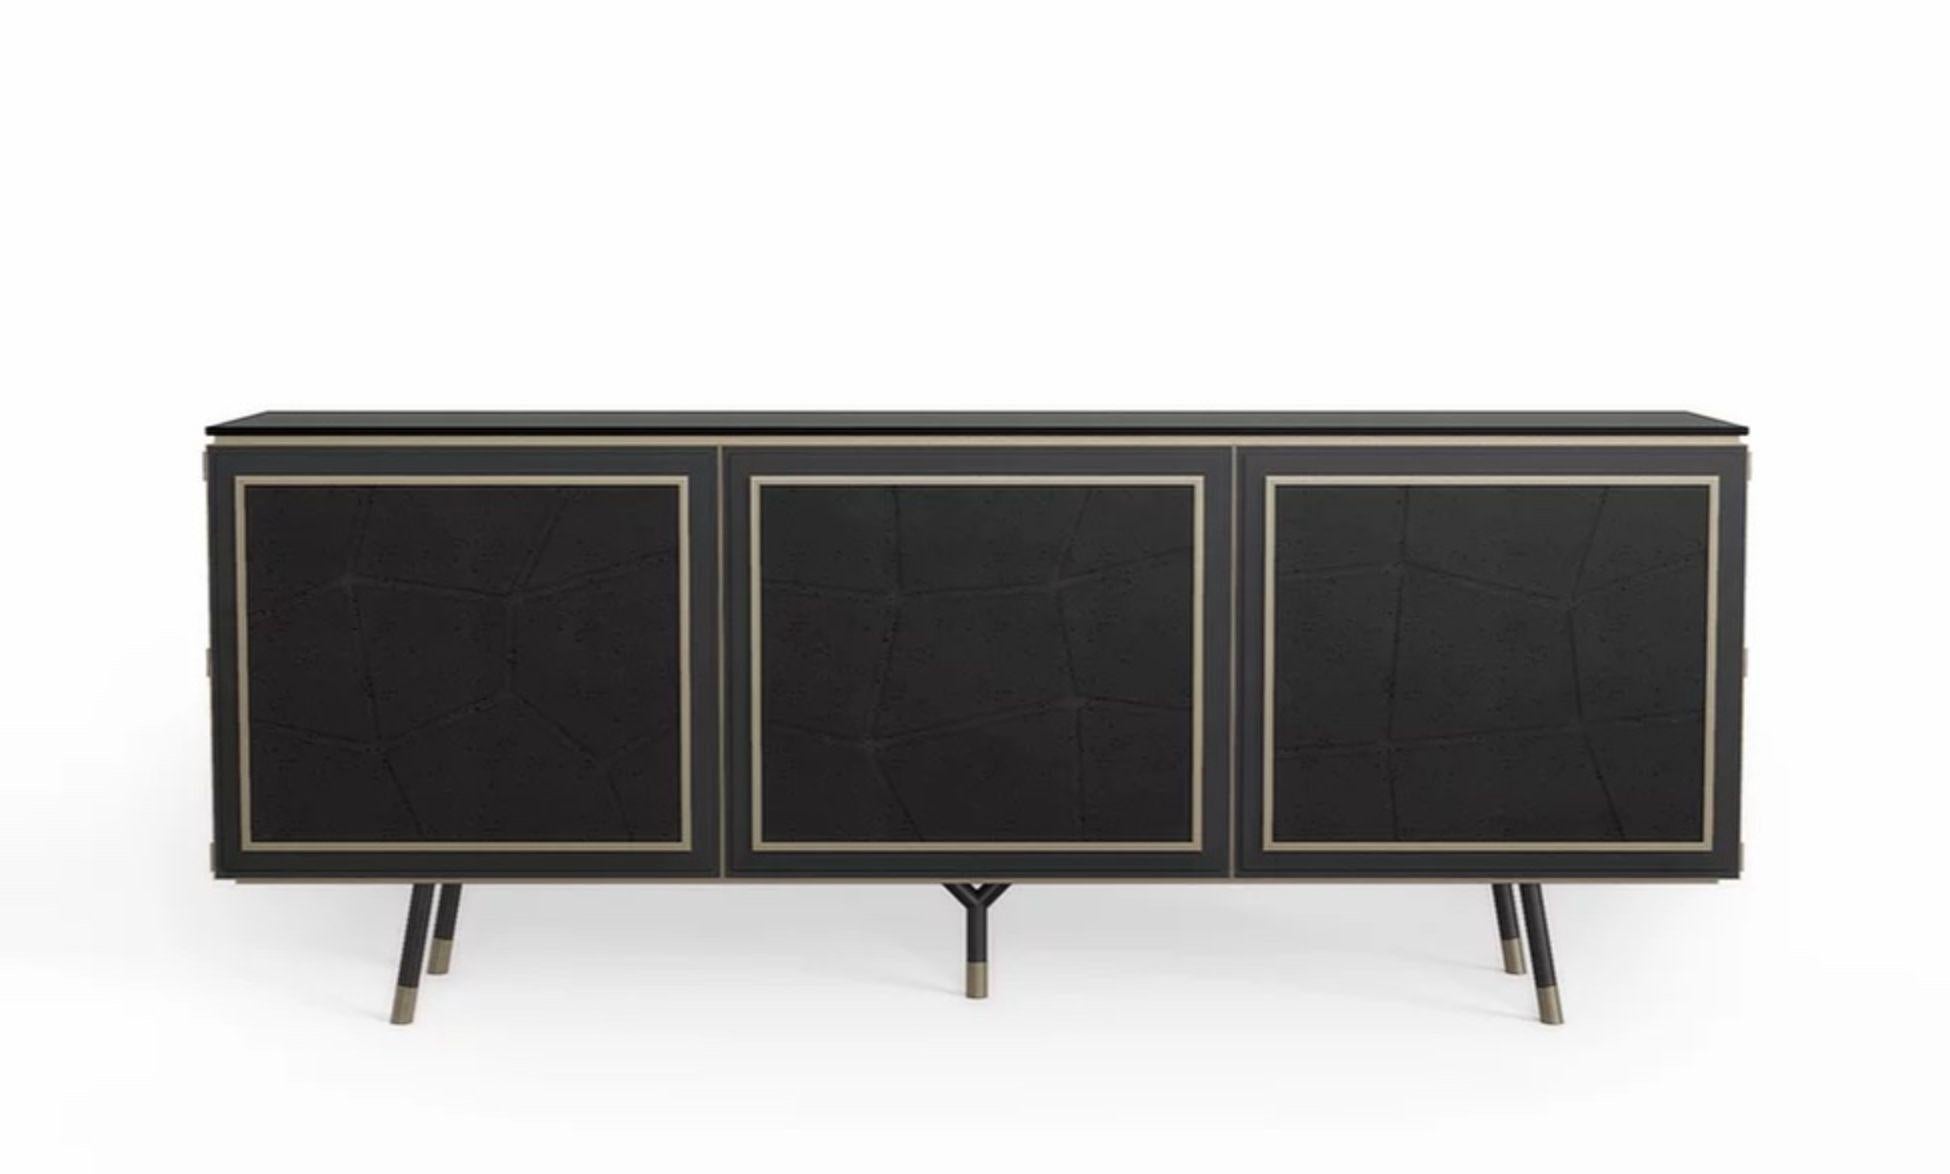 Tortuga cabinet by Marmi Serafini
Materials: Pietra Lavica Nera, bronze brass, leather, wood
Dimensions: D 47 x W 210 x H 83 cm

Pietra Lavica is granite which recalls the earth and its different formations. That is why, this peculiar feature is